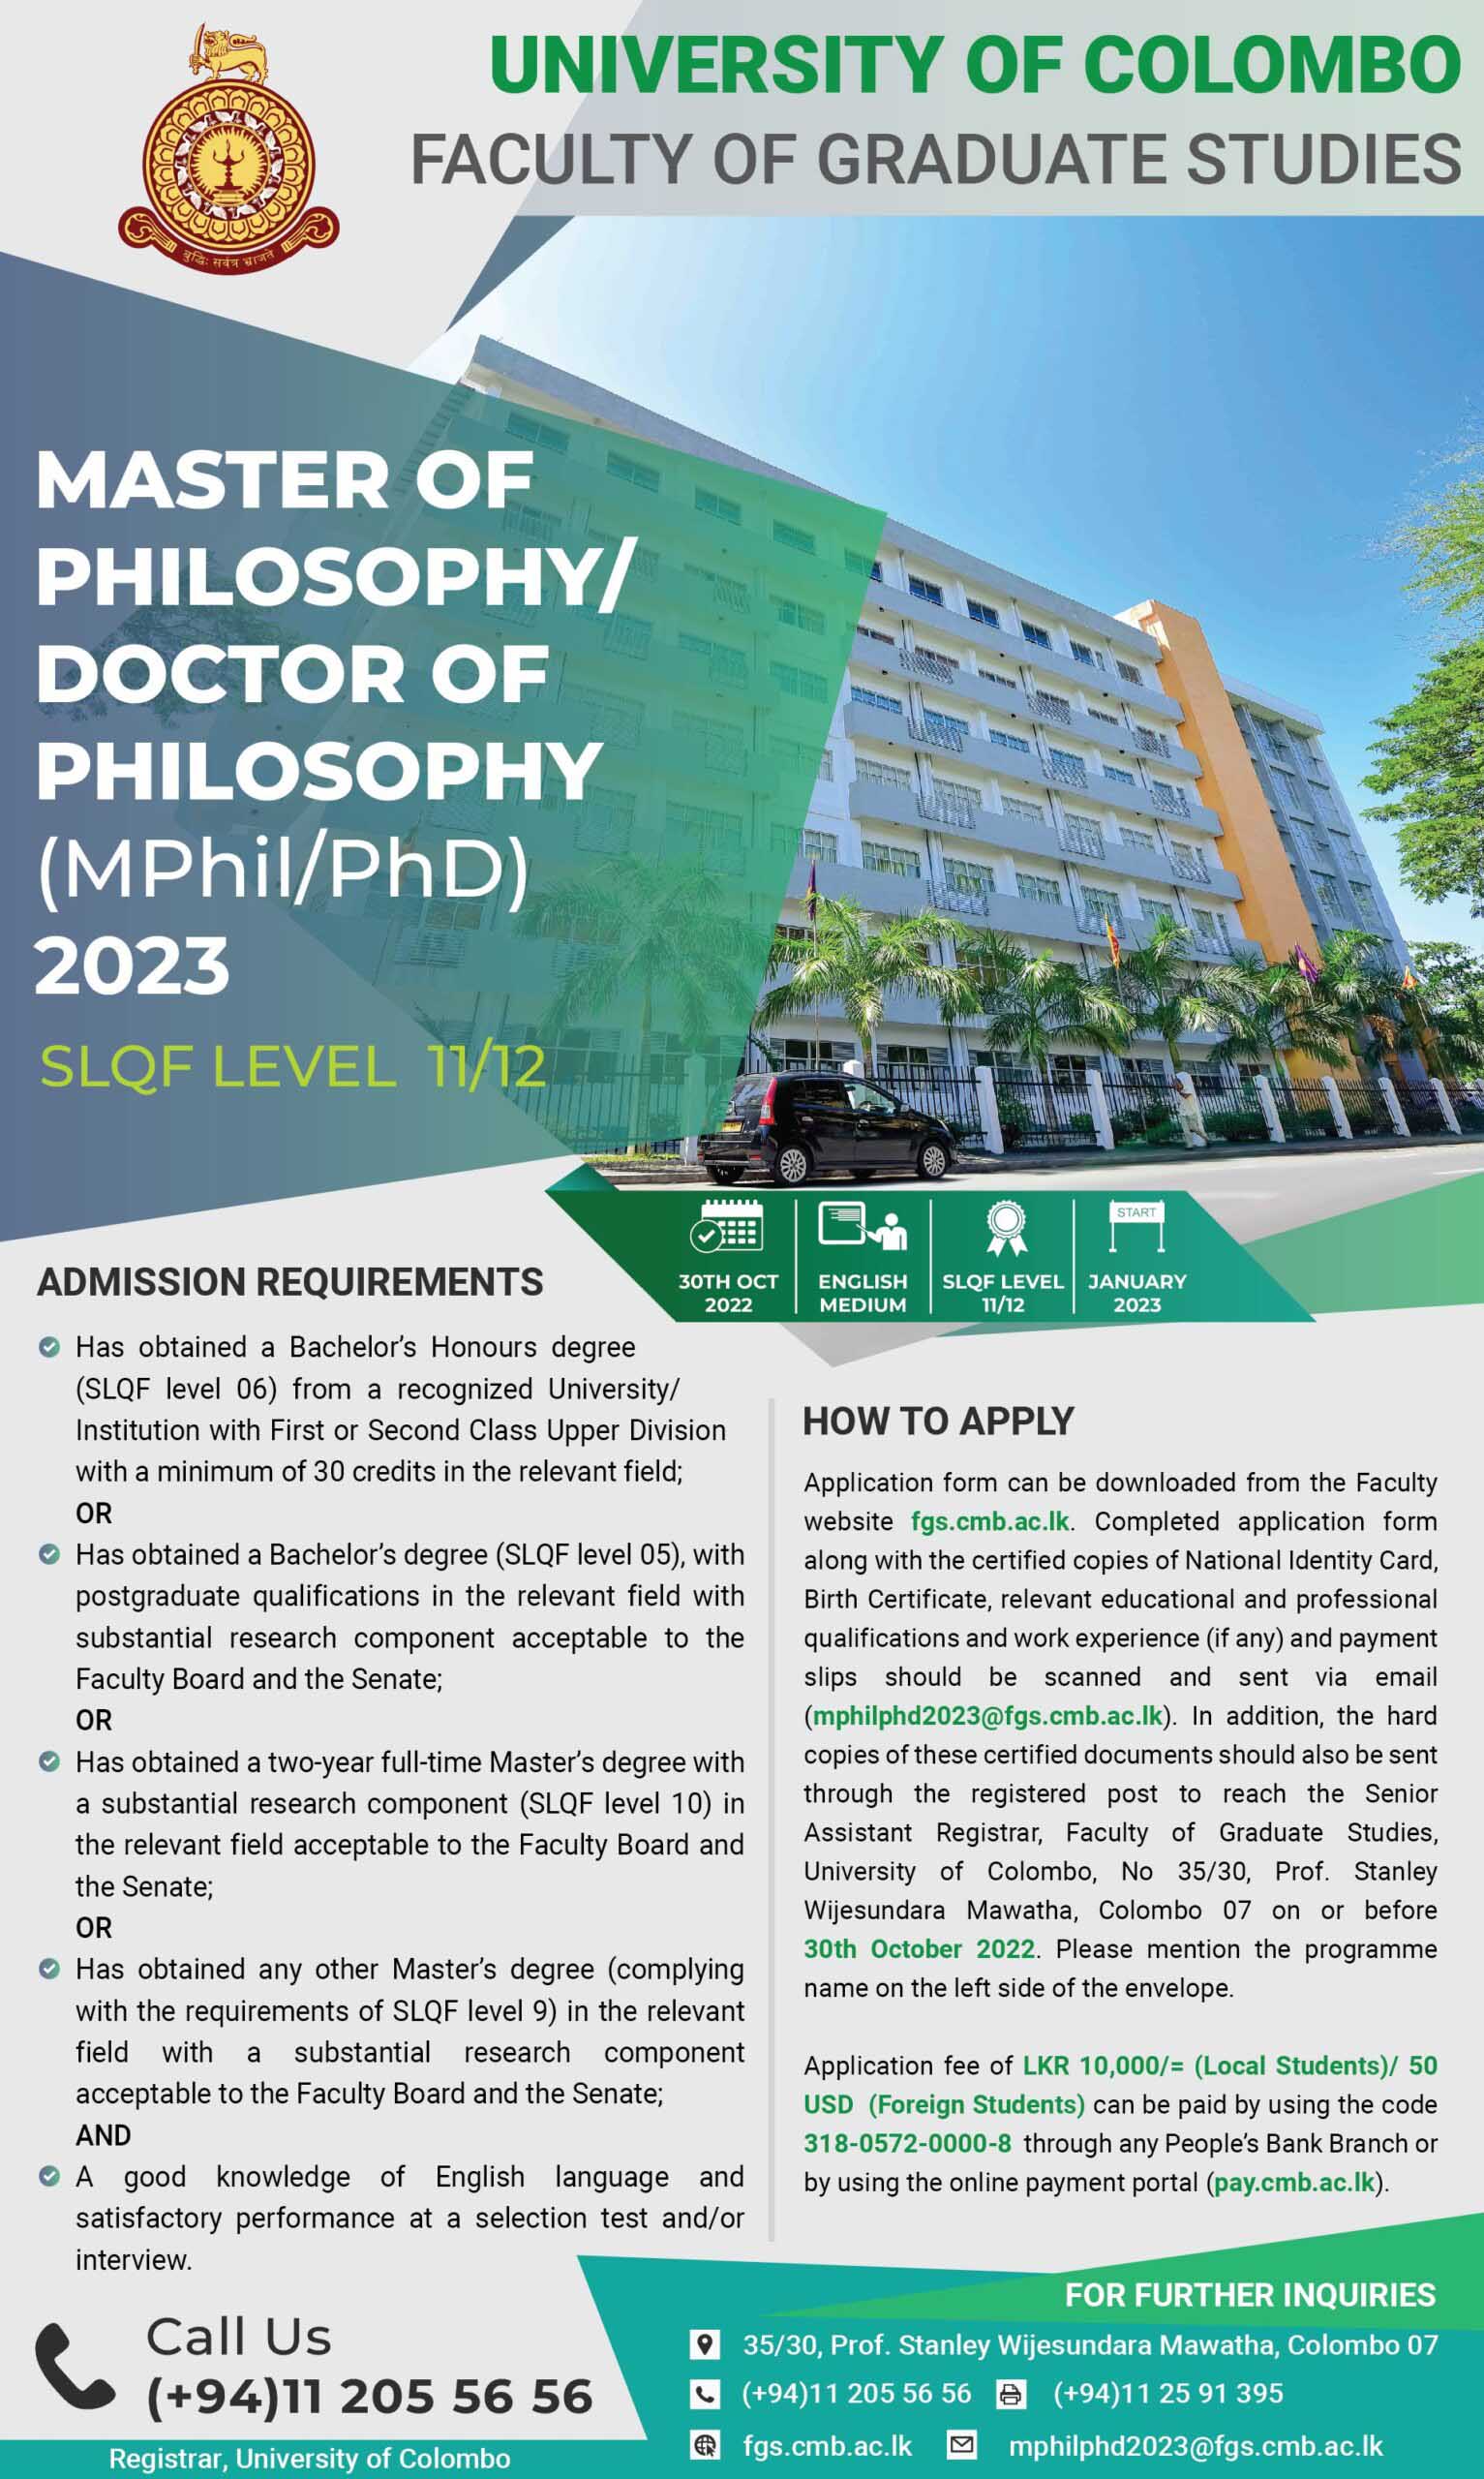 Master of Philosophy/Doctor of Philosophy (MPhil/PhD) 2023 - University of Colombo